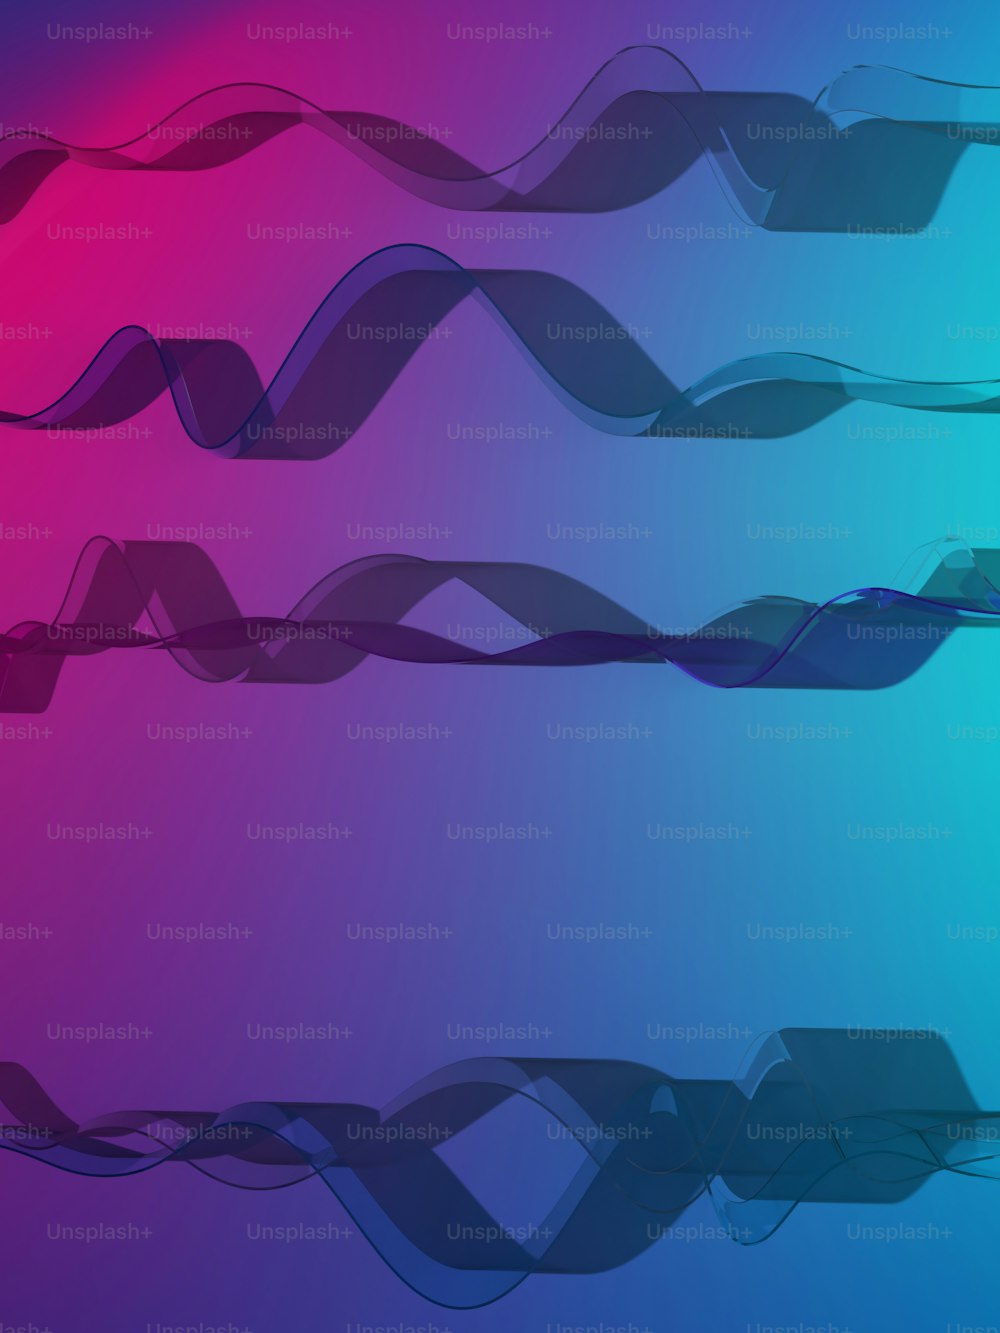 a blue and pink background with wavy lines